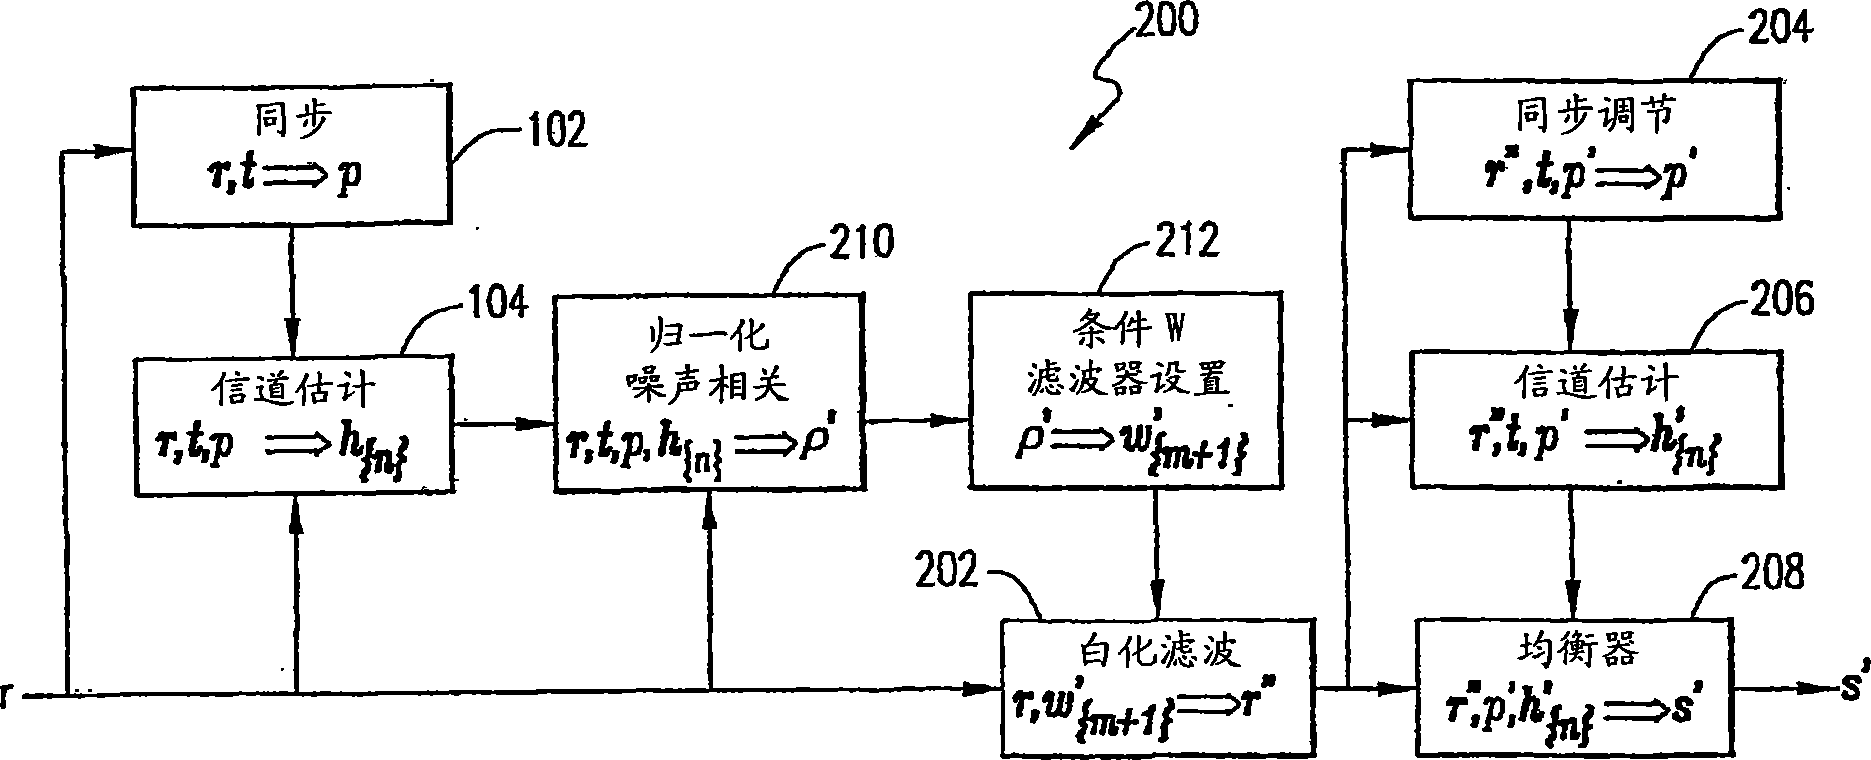 Method of and apparatus for noise whitening filtering